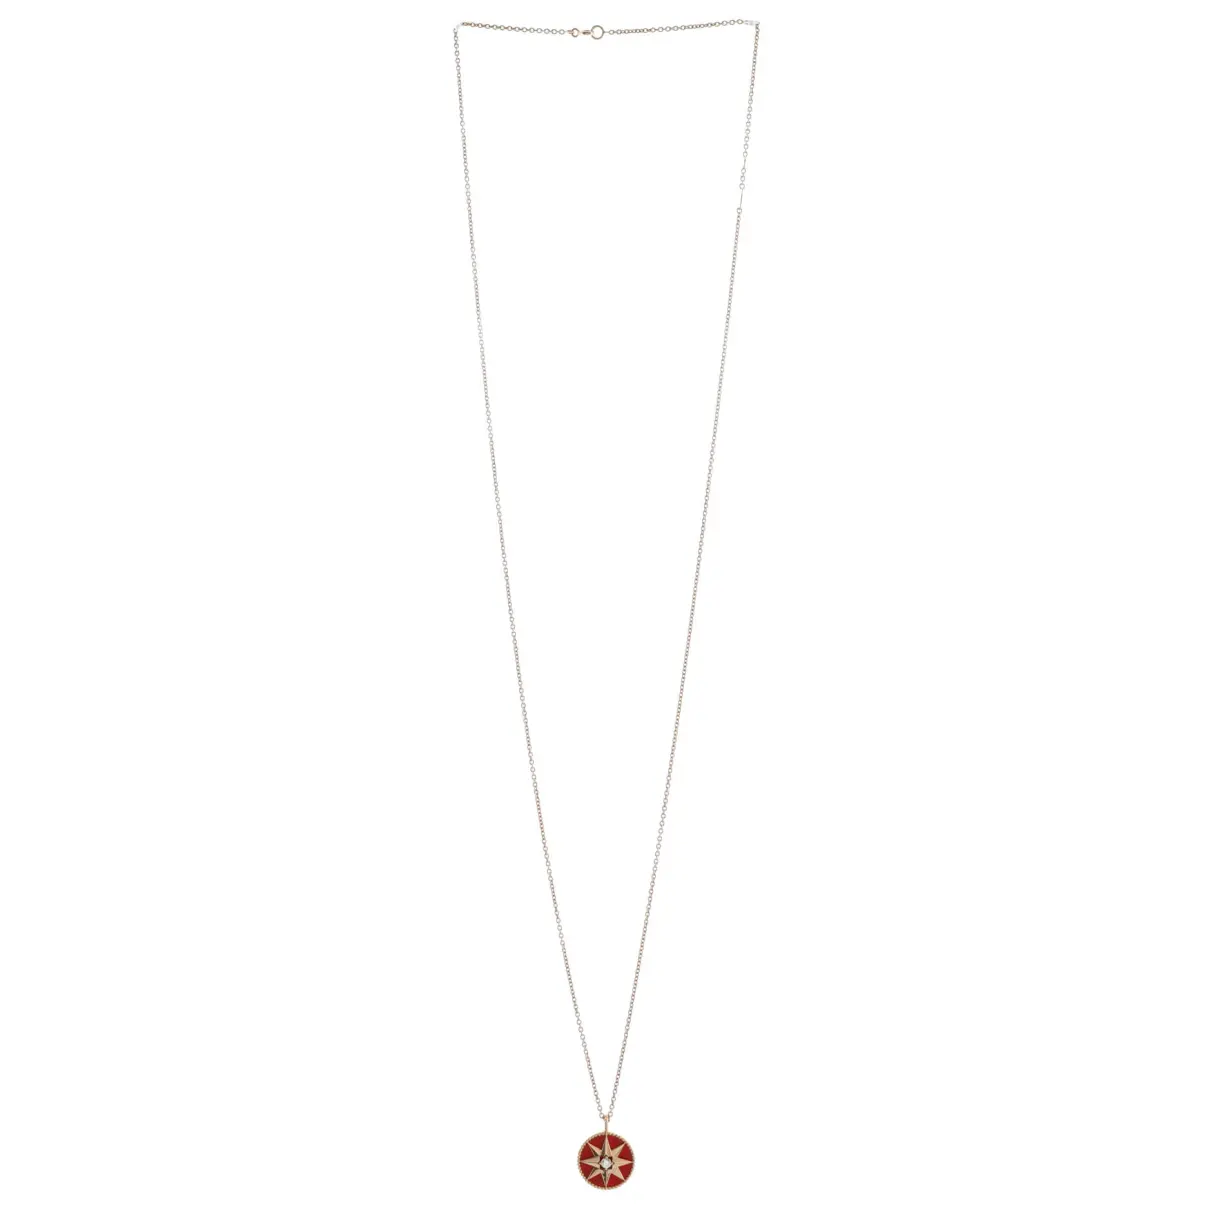 Buy Christian Dior Pink gold necklace online